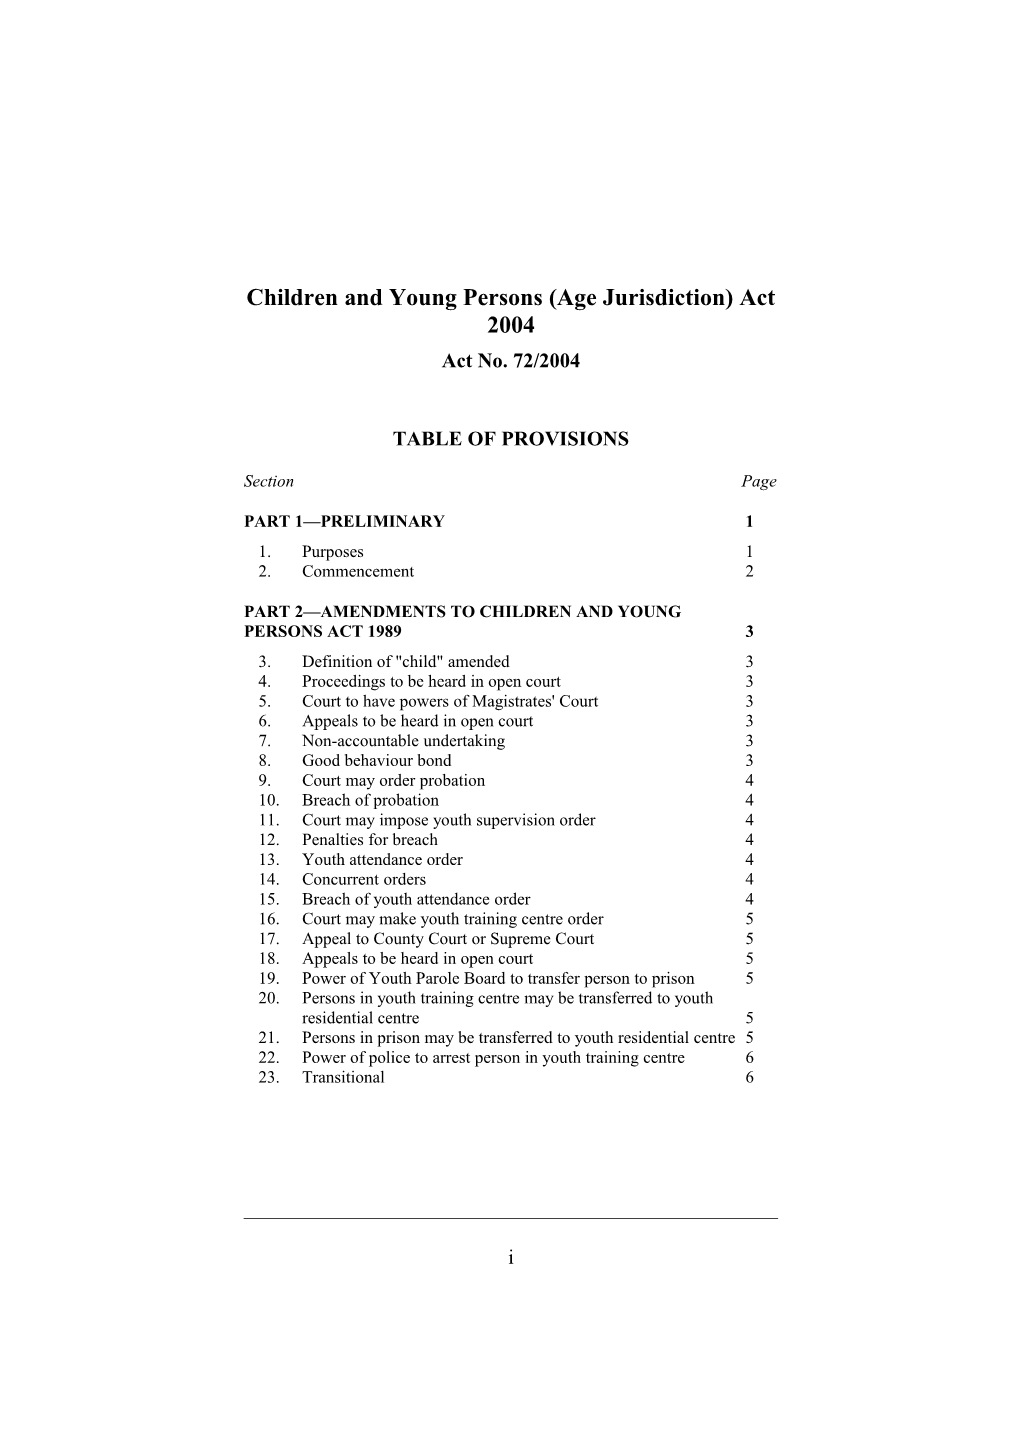 Children and Young Persons (Age Jurisdiction) Act 2004